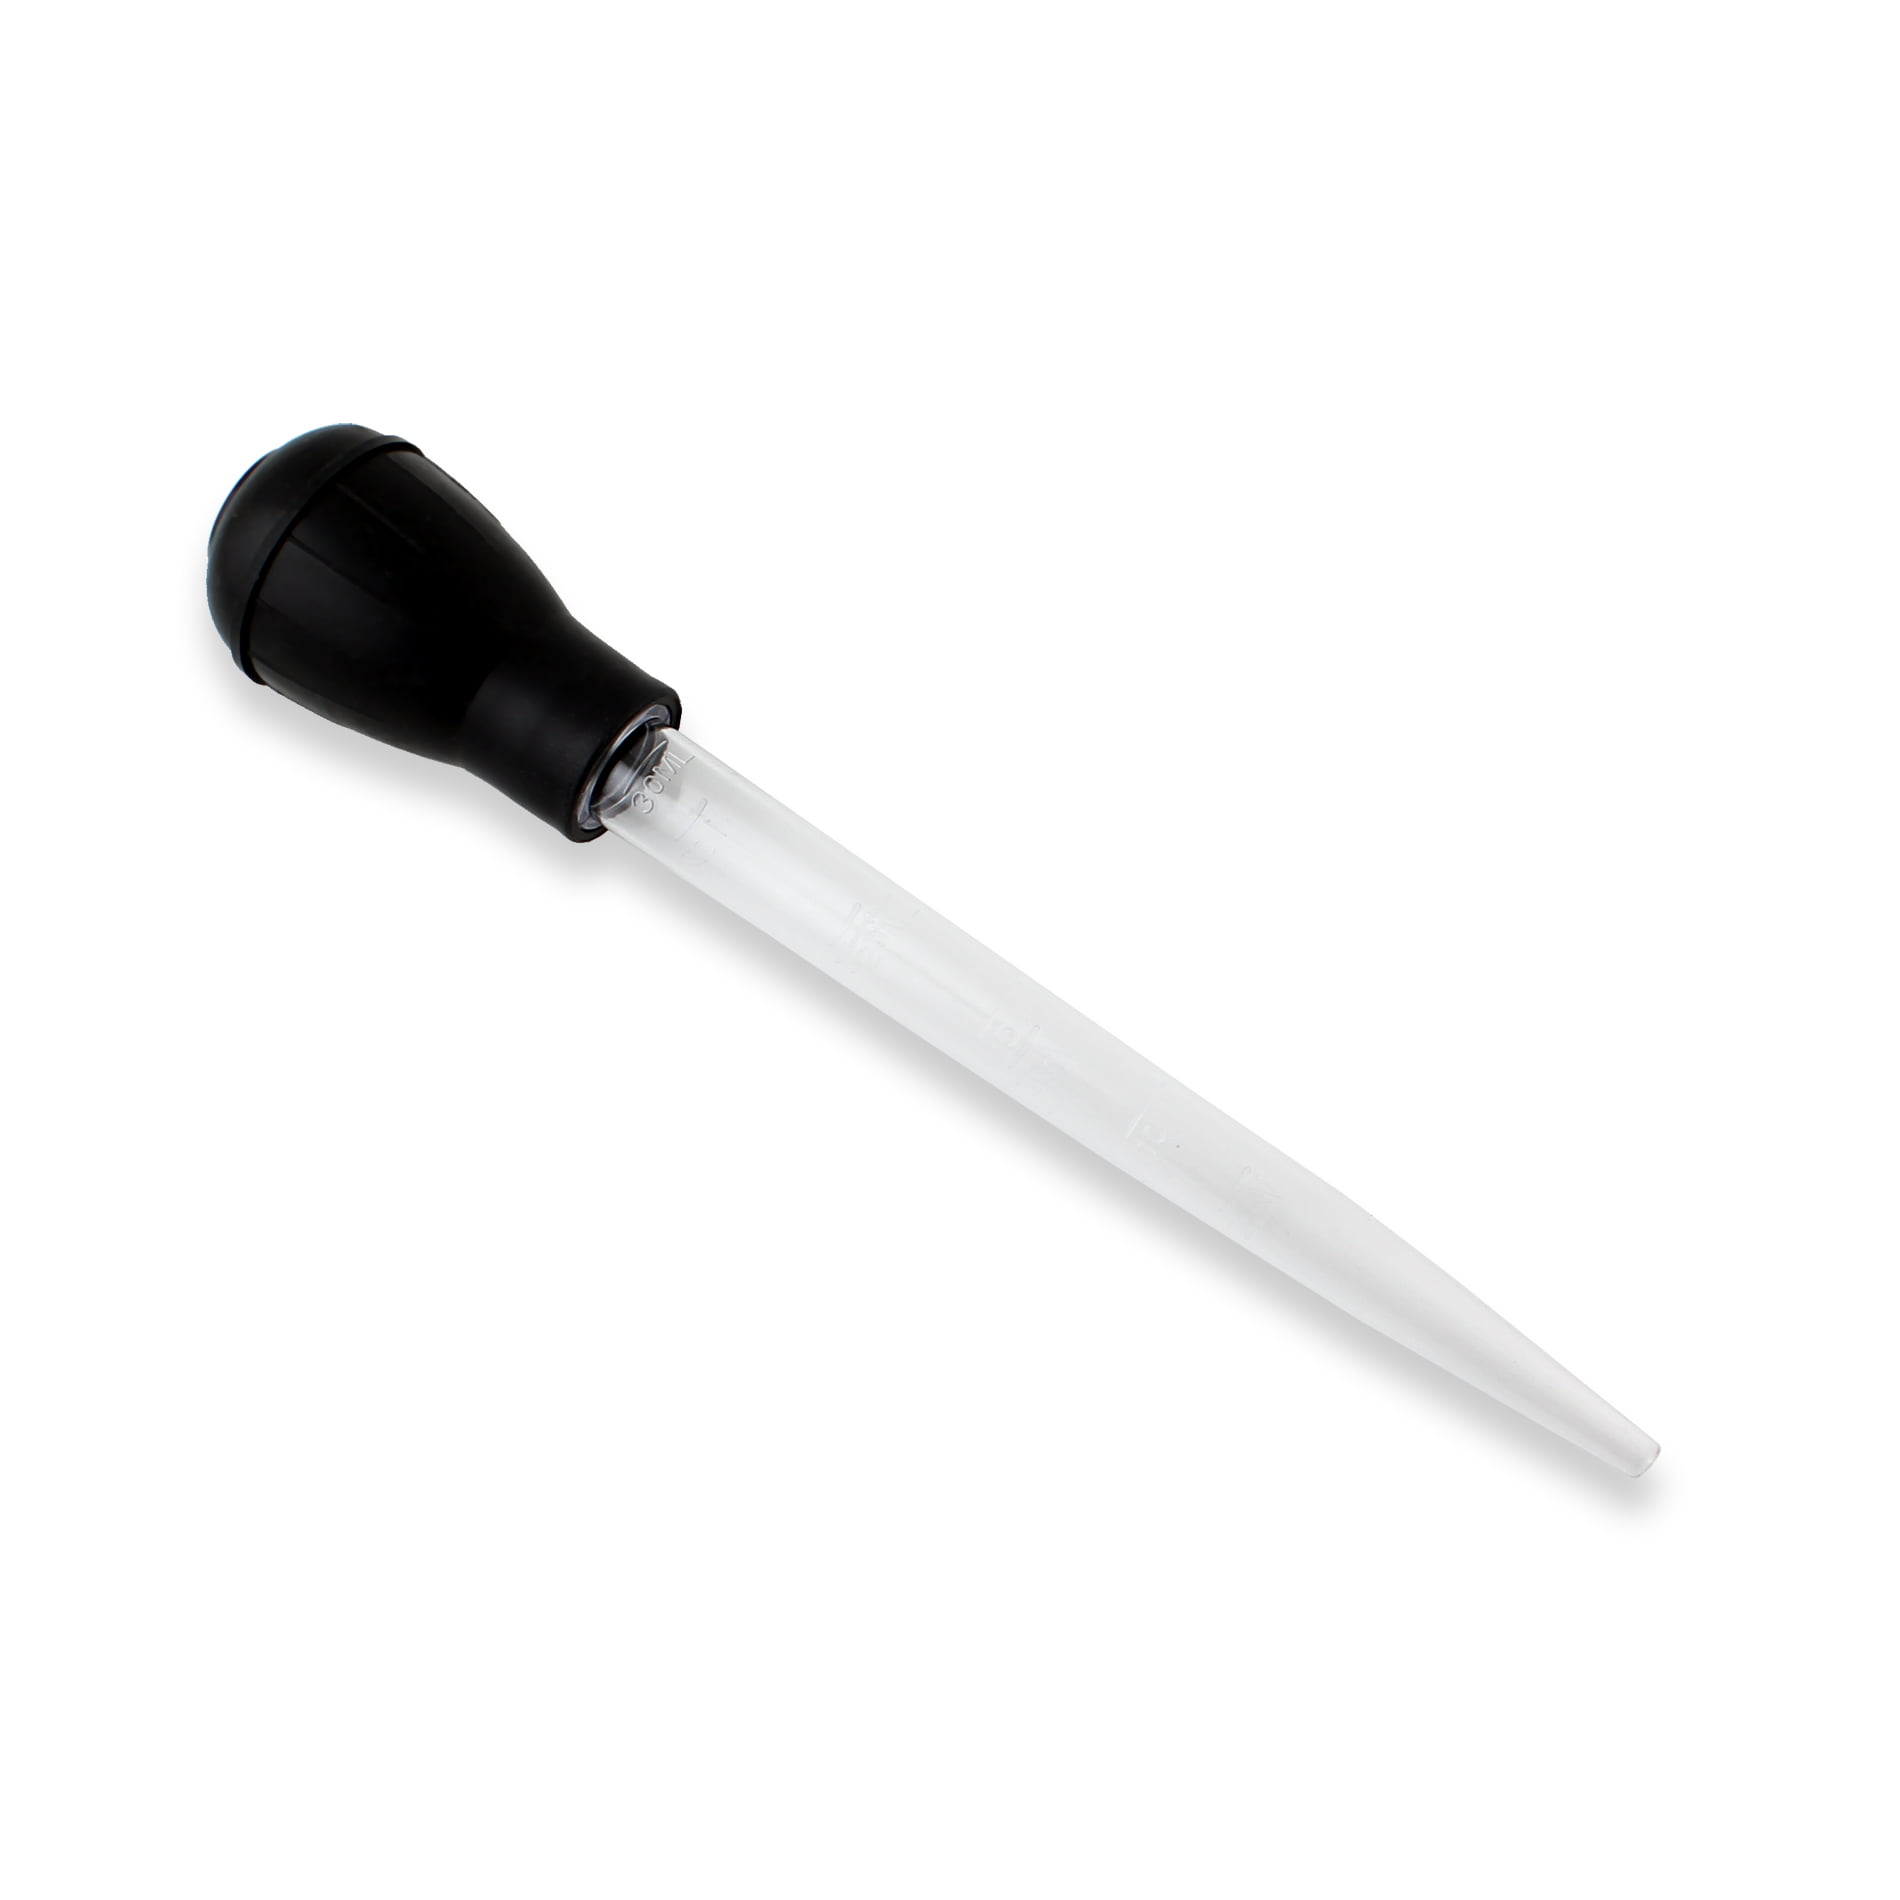 Black Tasty Poultry Turkey Meat Chicken Baster BBQ Oven Cooking Tube ...